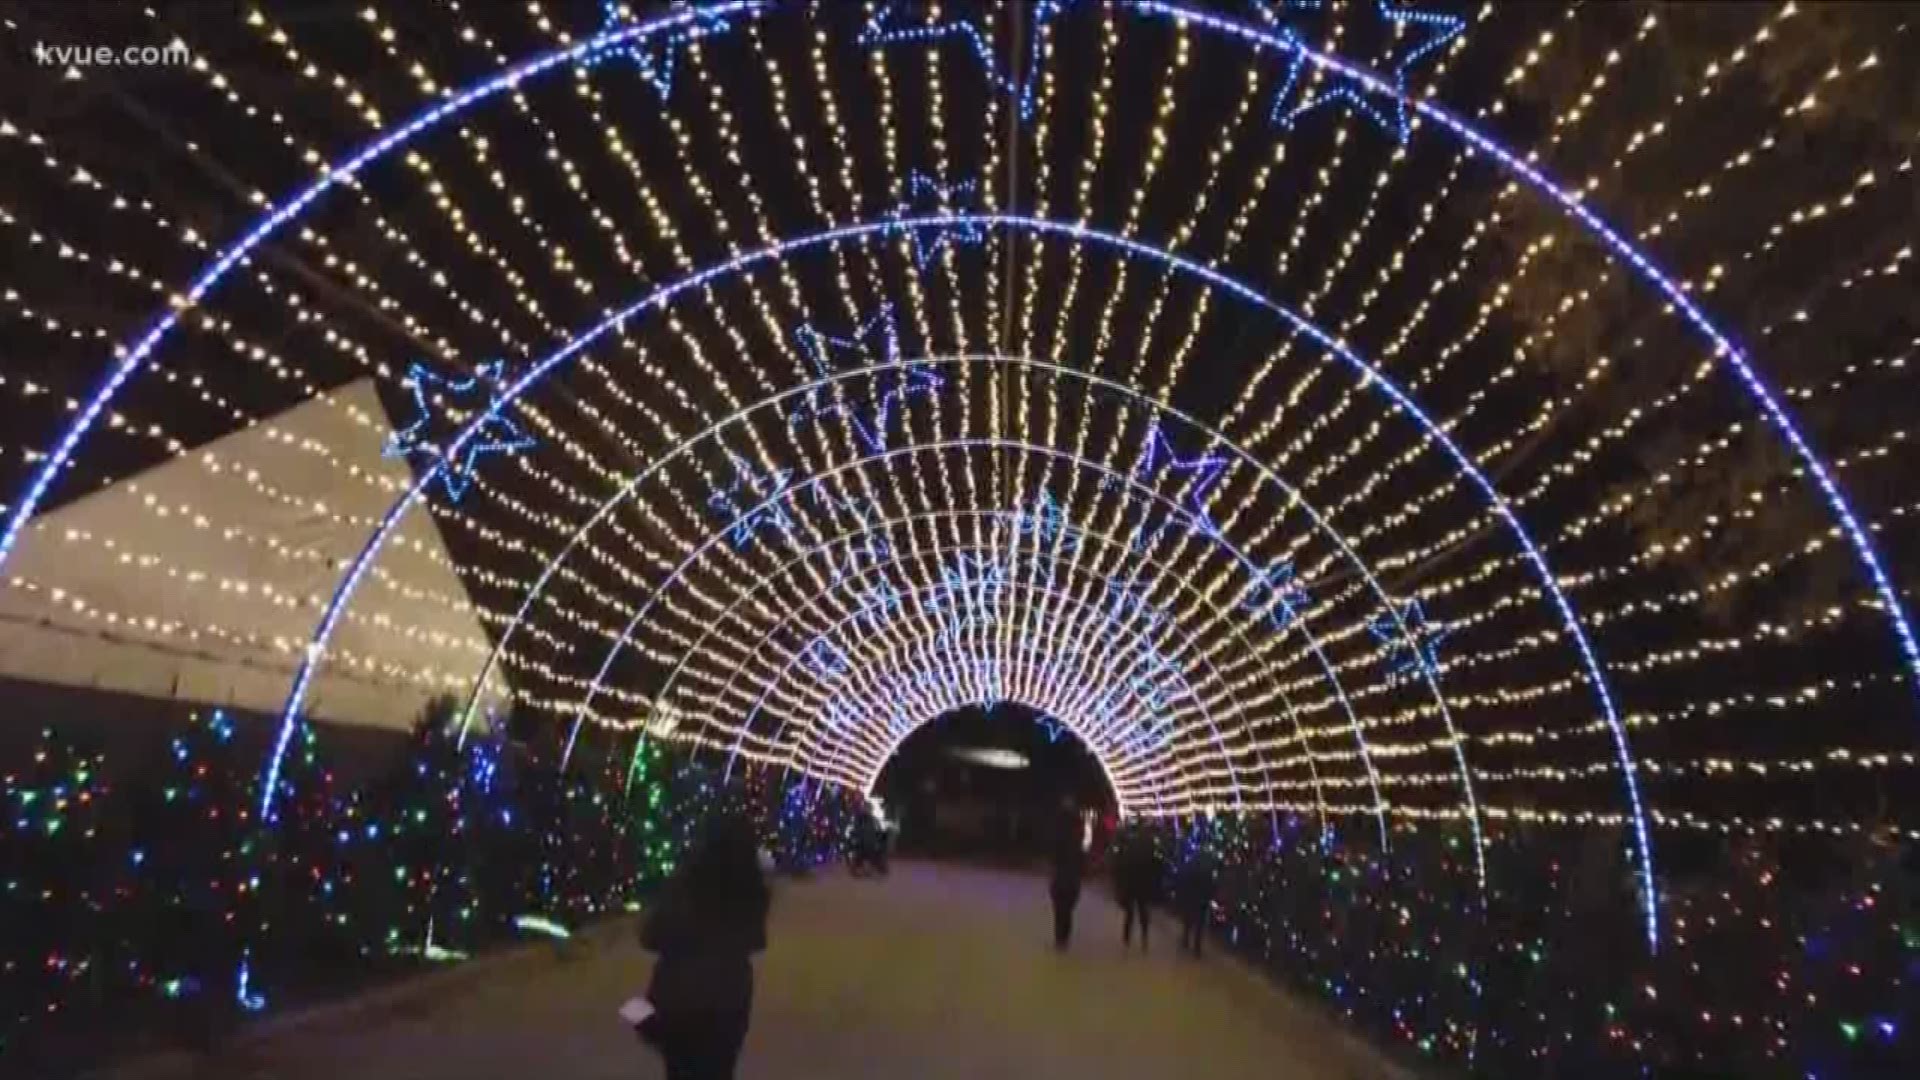 The trail is expected to bring thousands of people to Zilker Park over the next two weeks.